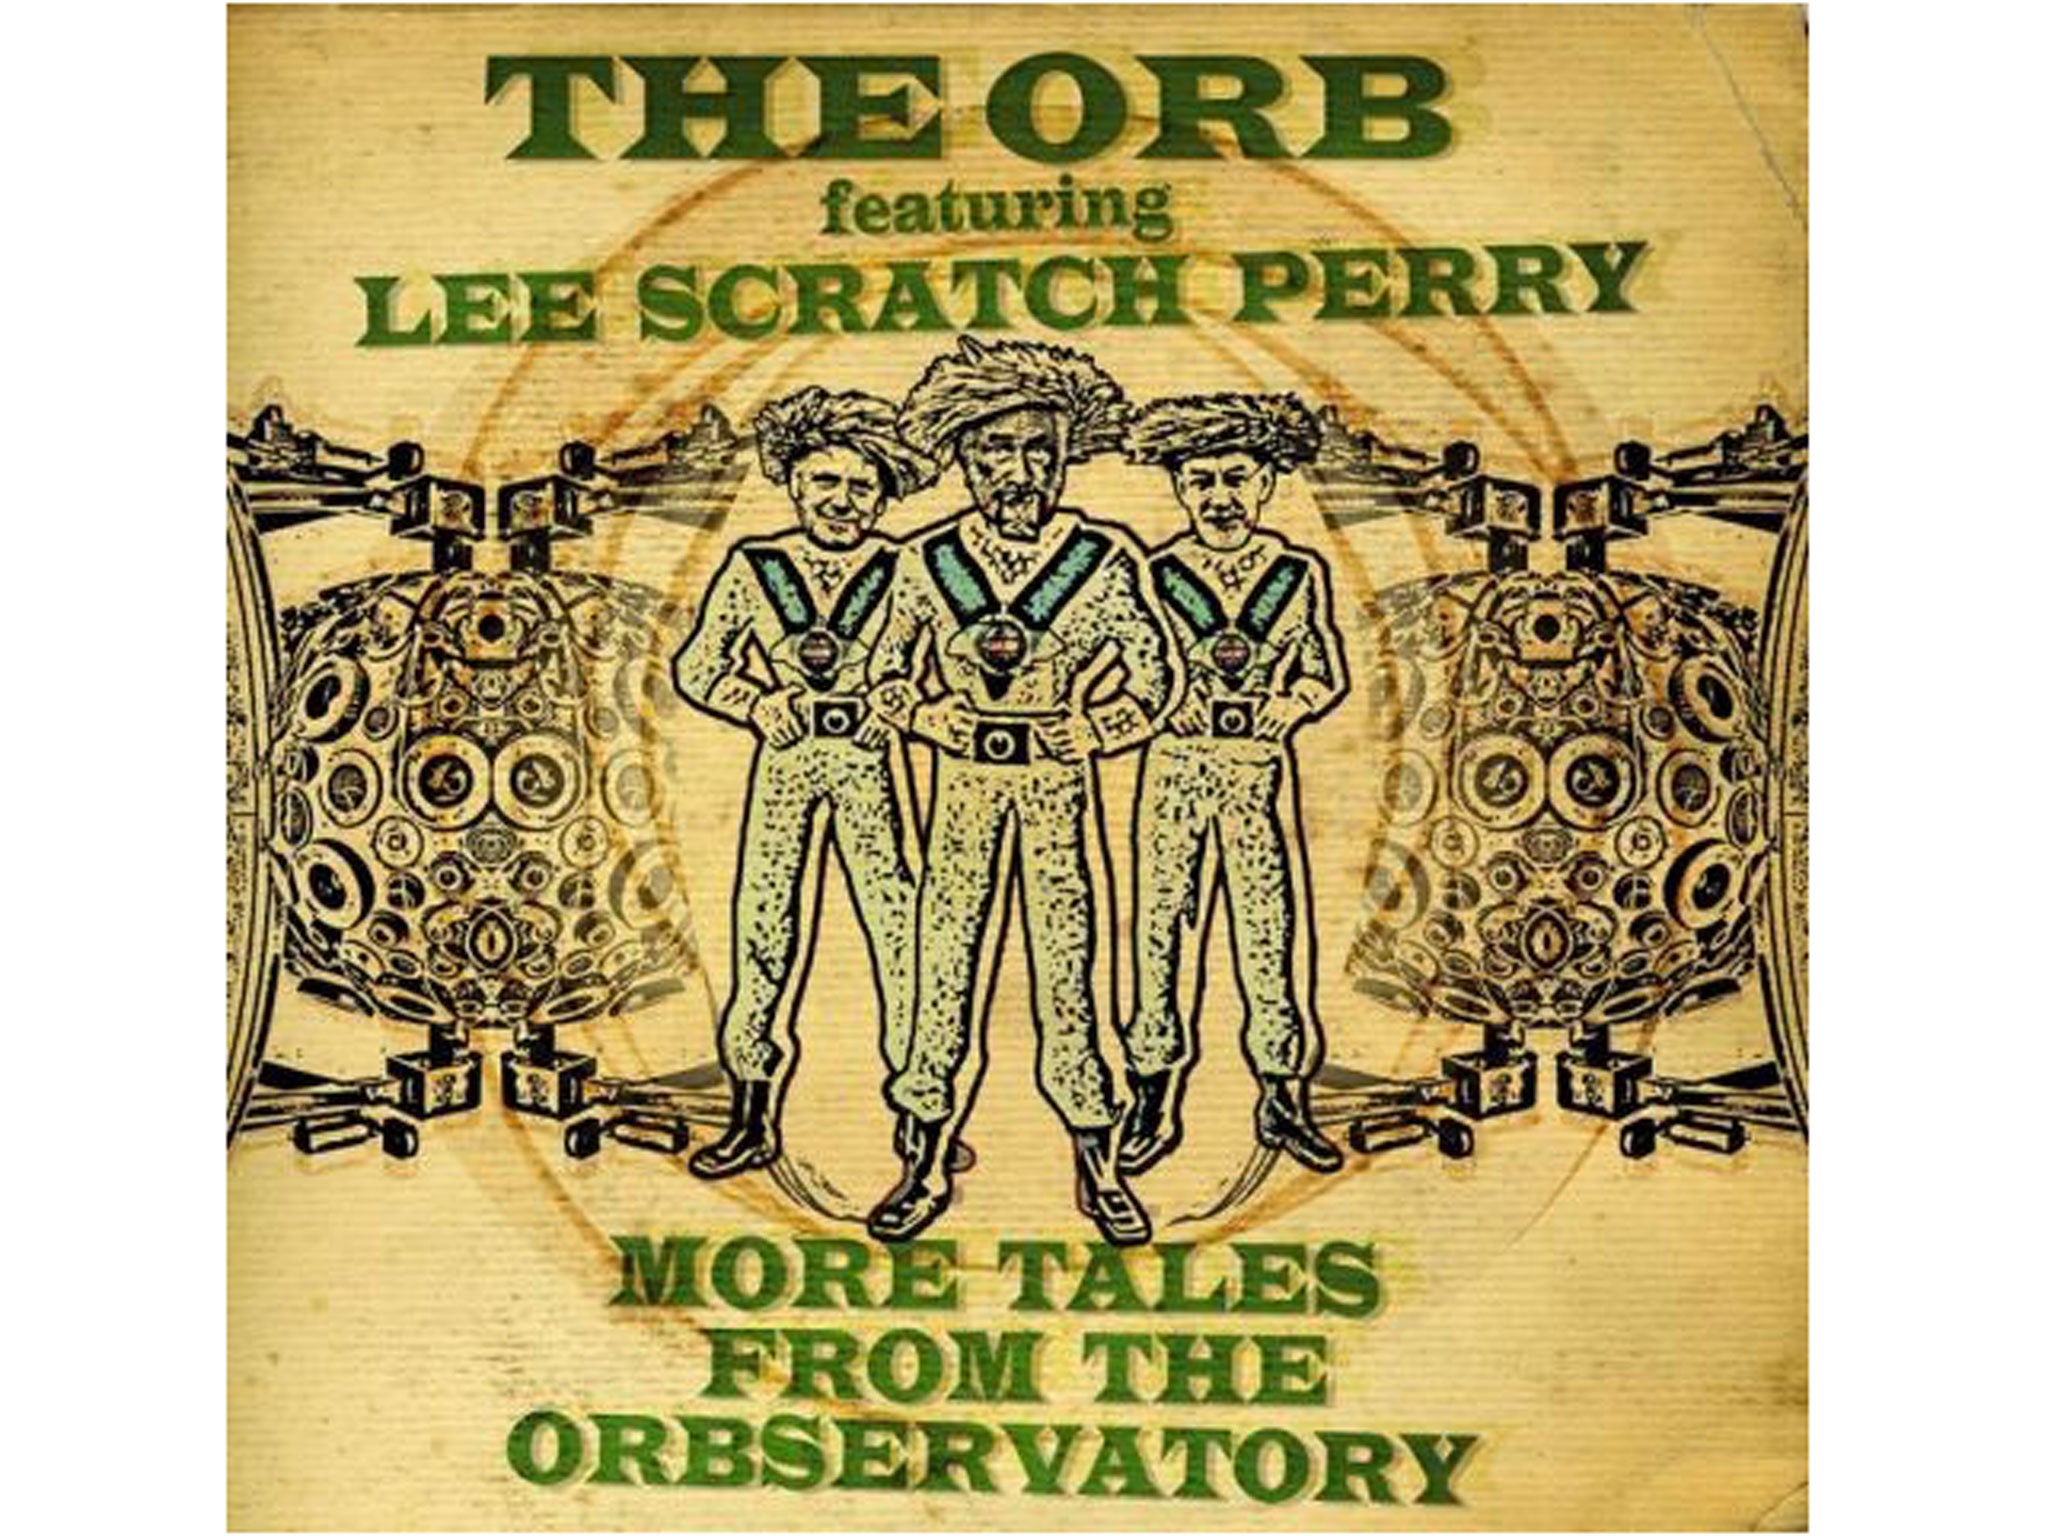 The Orb featuring Lee Scratch Perry, More Tales from the Observatory (Cooking Vinyl)